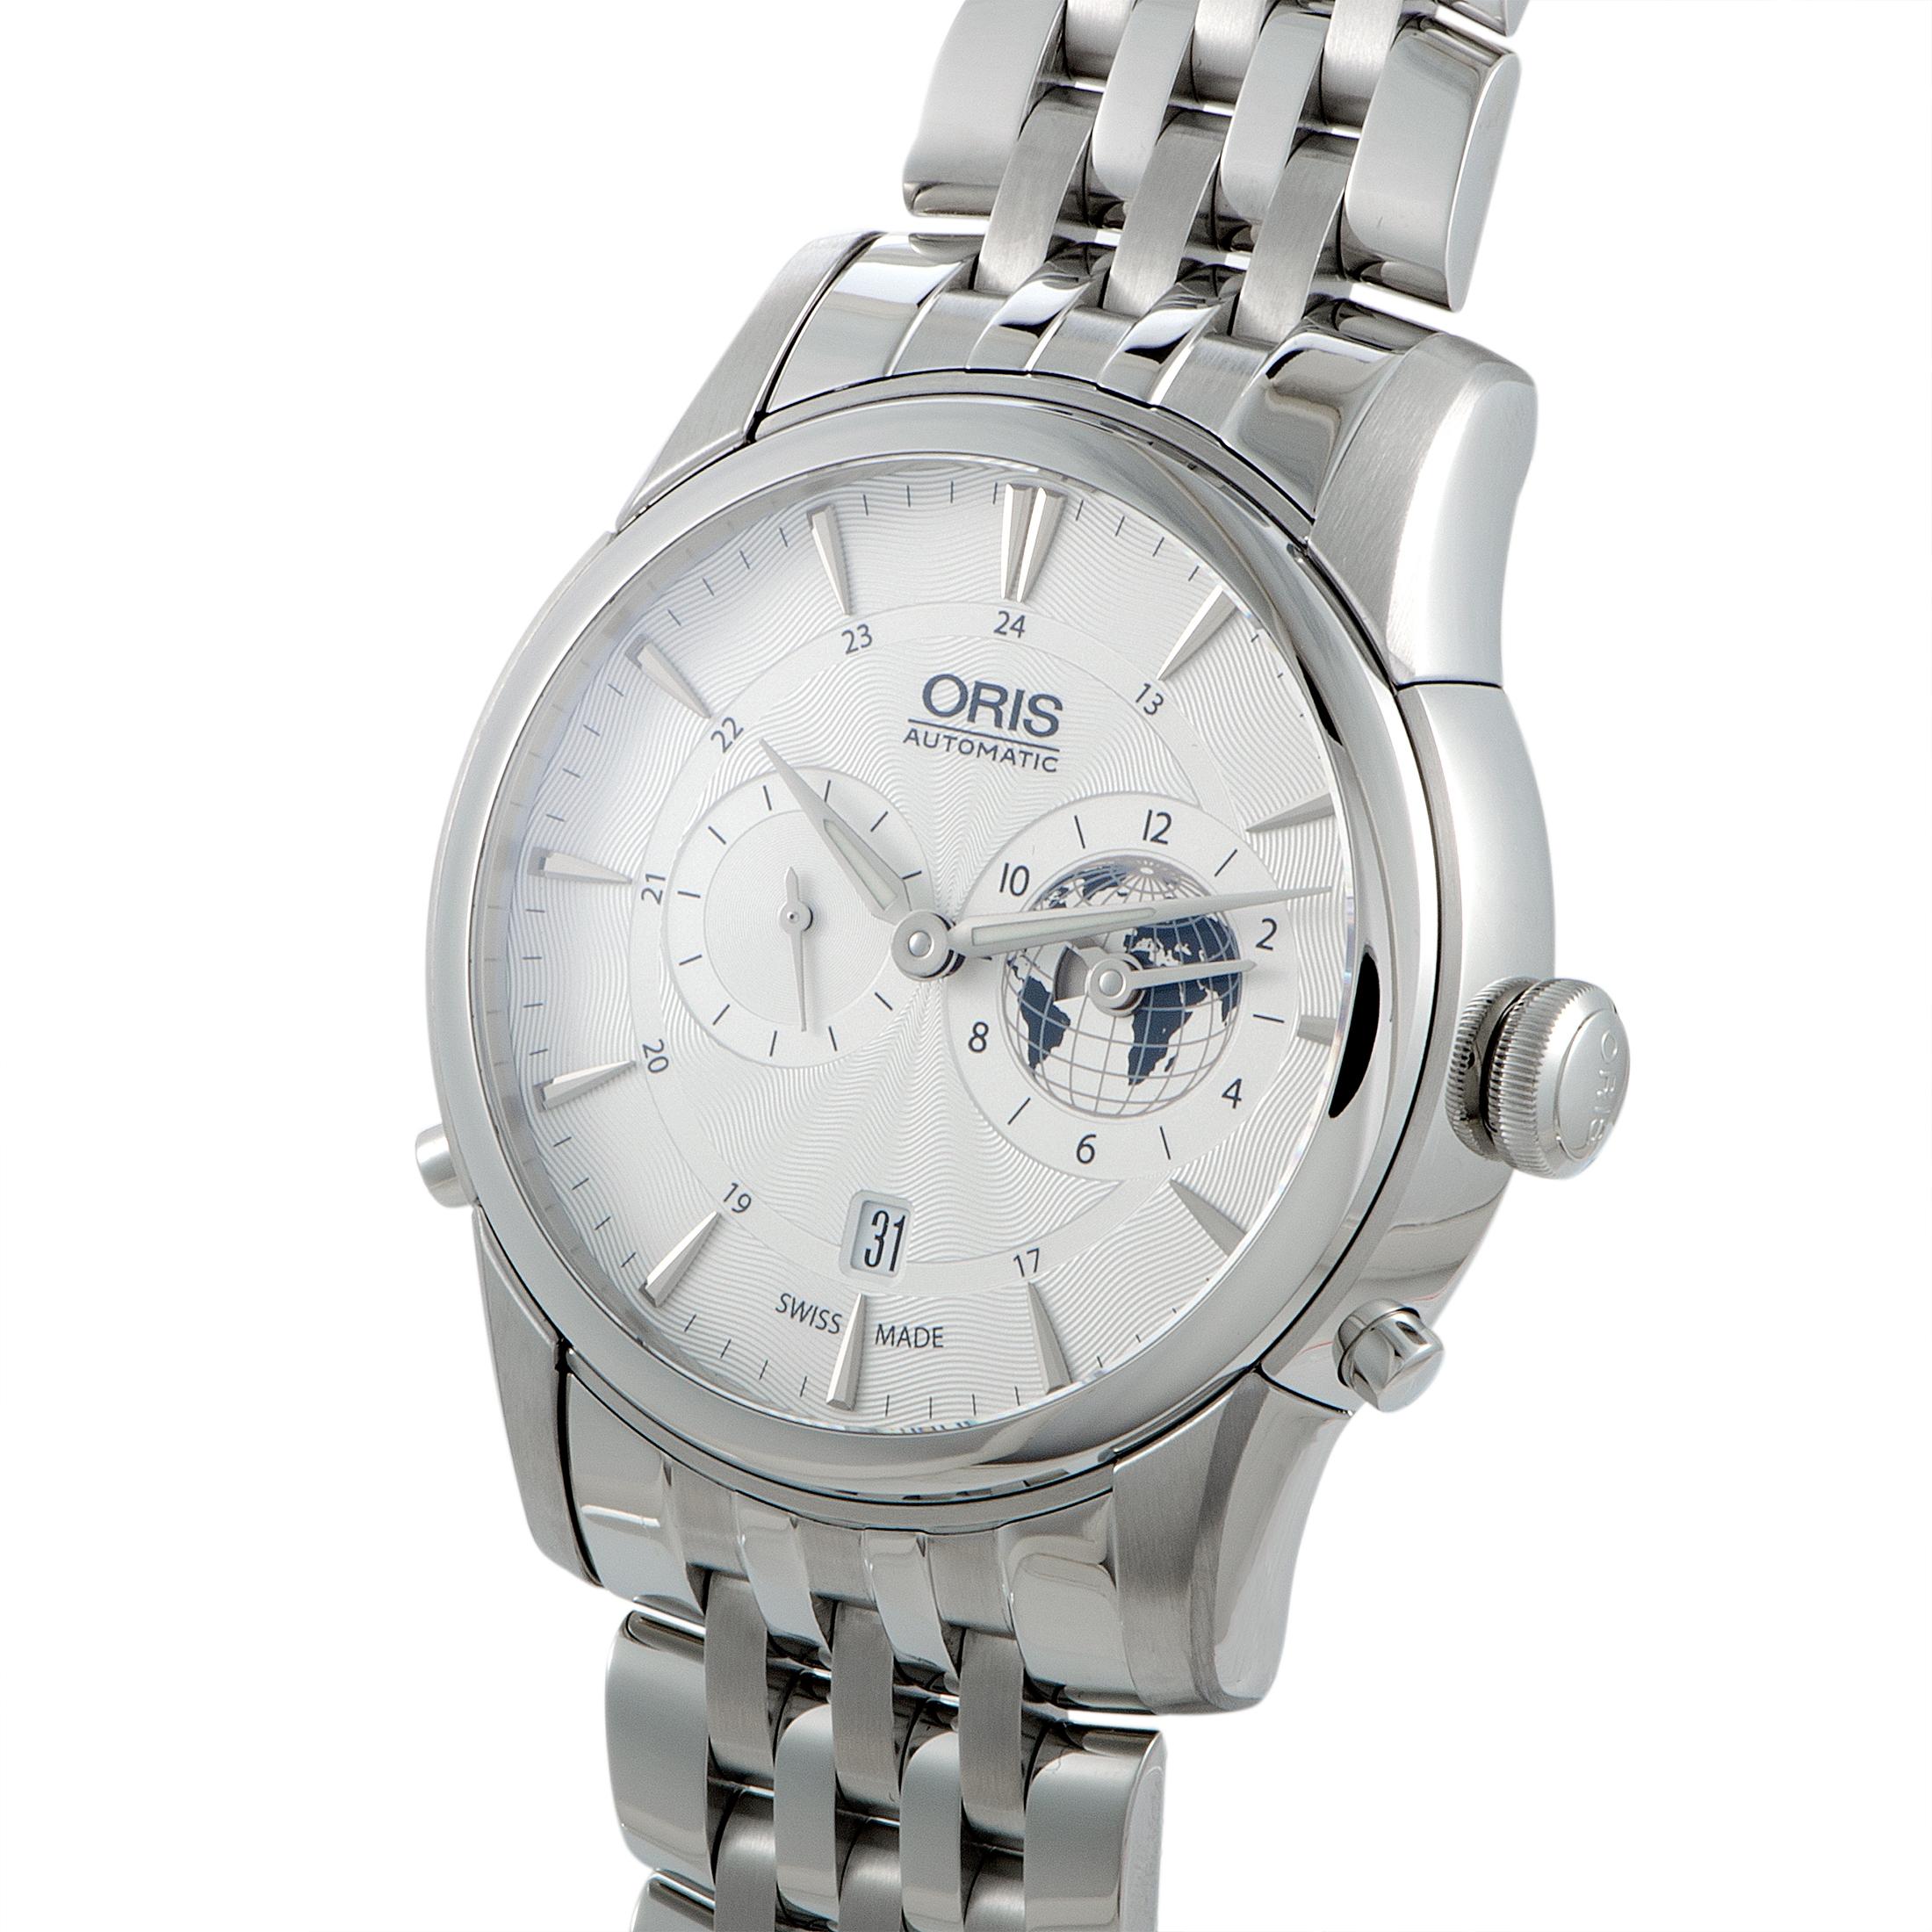 Exuding absolute excellence and utmost refinement with its sophisticated movement and the exquisitely finished dial, this fascinating wristwatch from Oris - limited to only 1,000 pieces - celebrates the intriguing history of time zones as we know